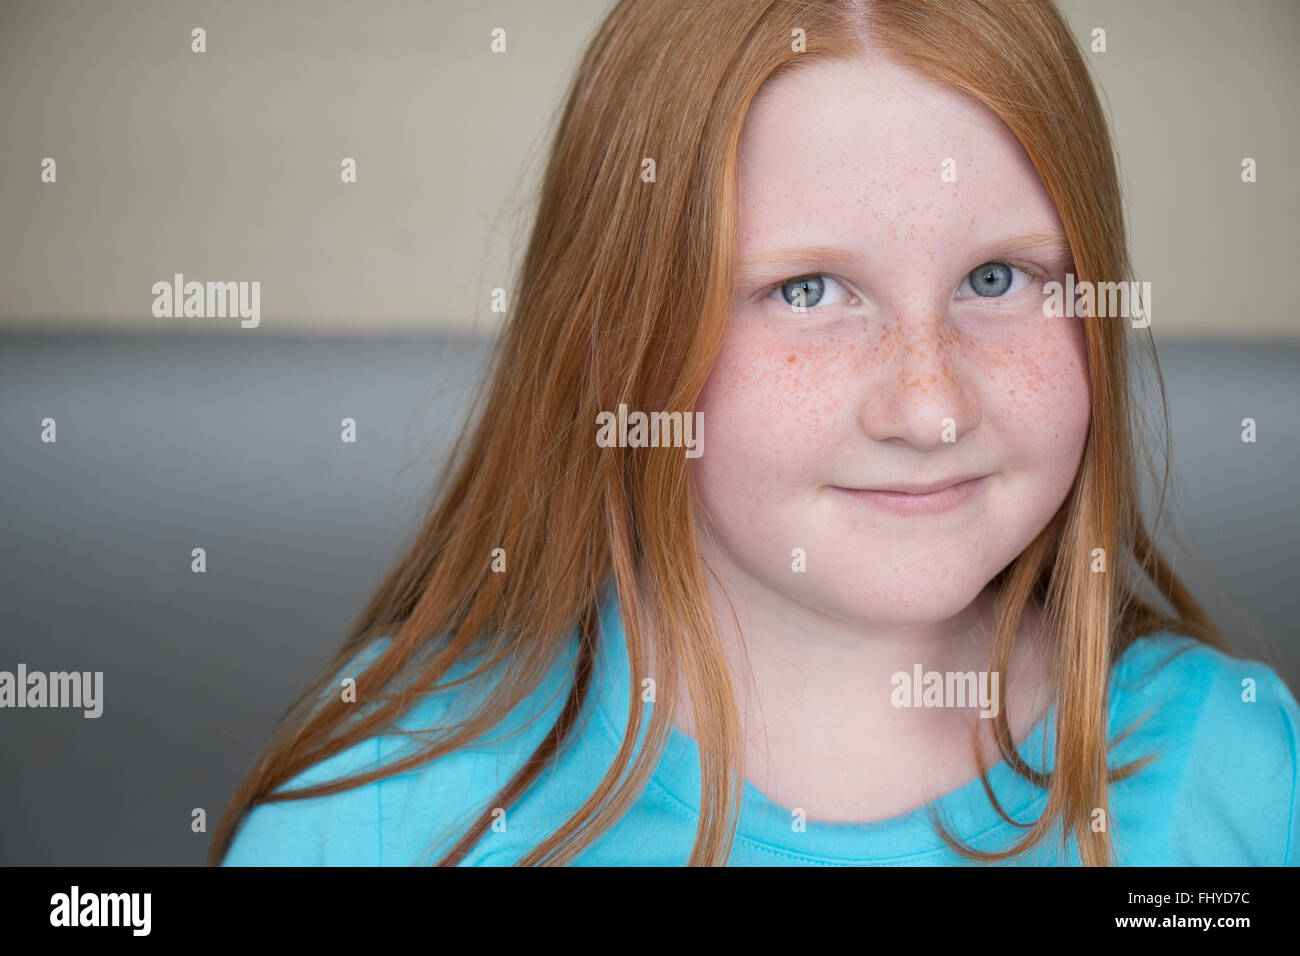 Red Haired, blue eyed Girl with a slight smile wearing a Blue Shirt close up looking at the camera Stock Photo